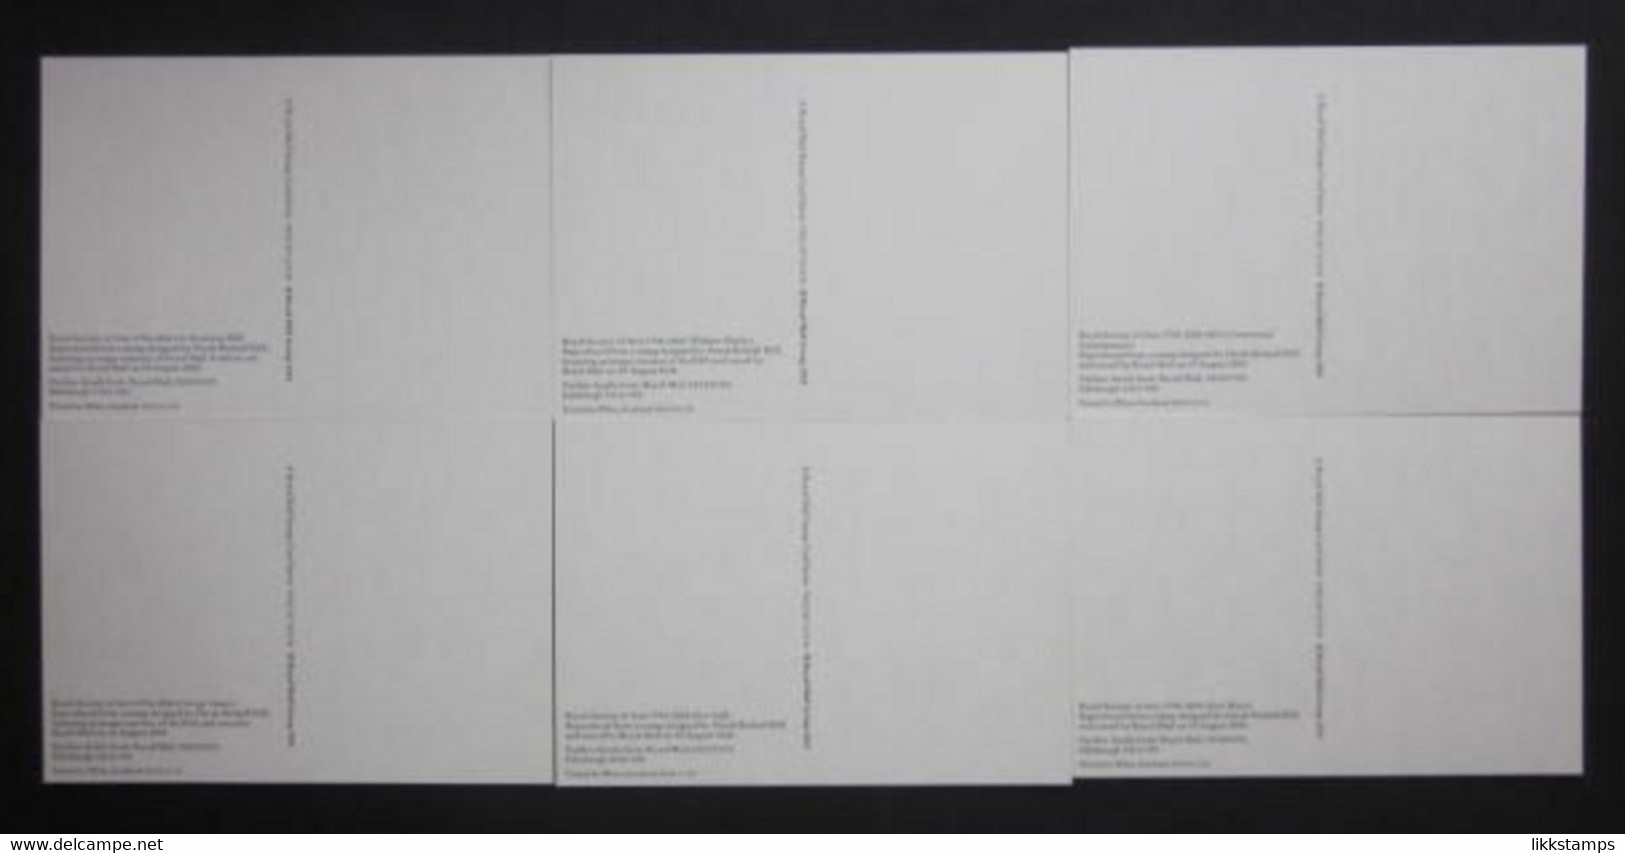 2004 THE 250th ANNIVERSARY OF THE ROYAL SOCIETY OF ARTS P.H.Q. CARDS UNUSED, ISSUE No. 267 (B) #01508 - PHQ Cards